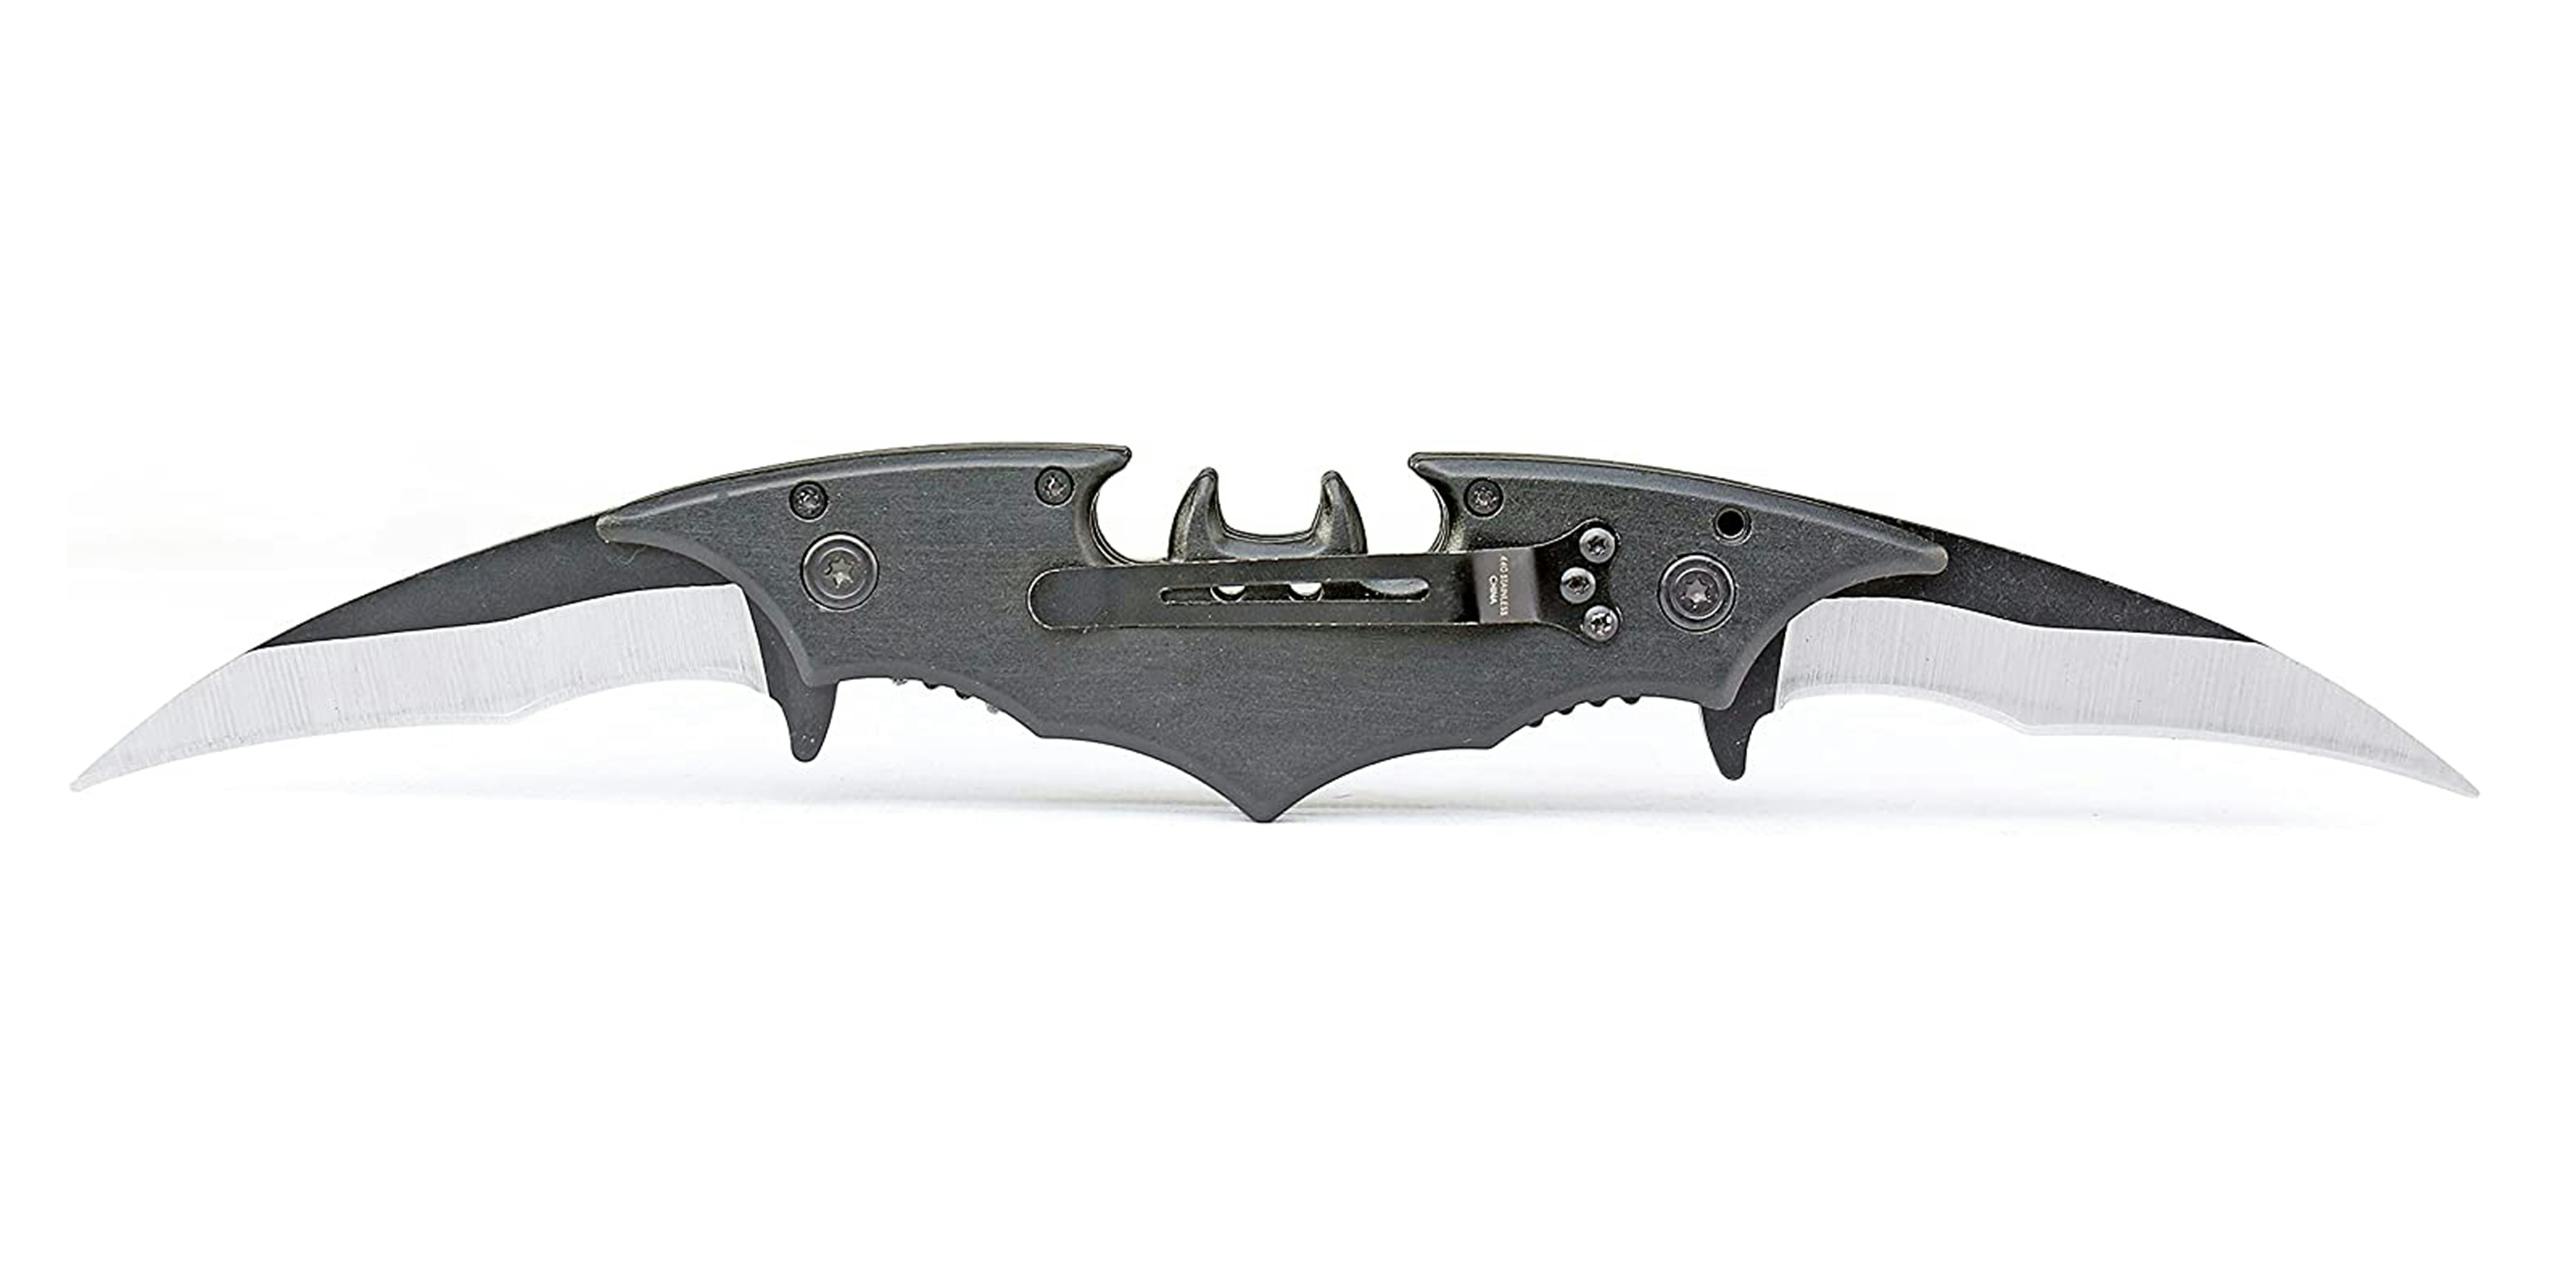 A Batman double blade pocket knife is one of the best holiday gifts for nerds.